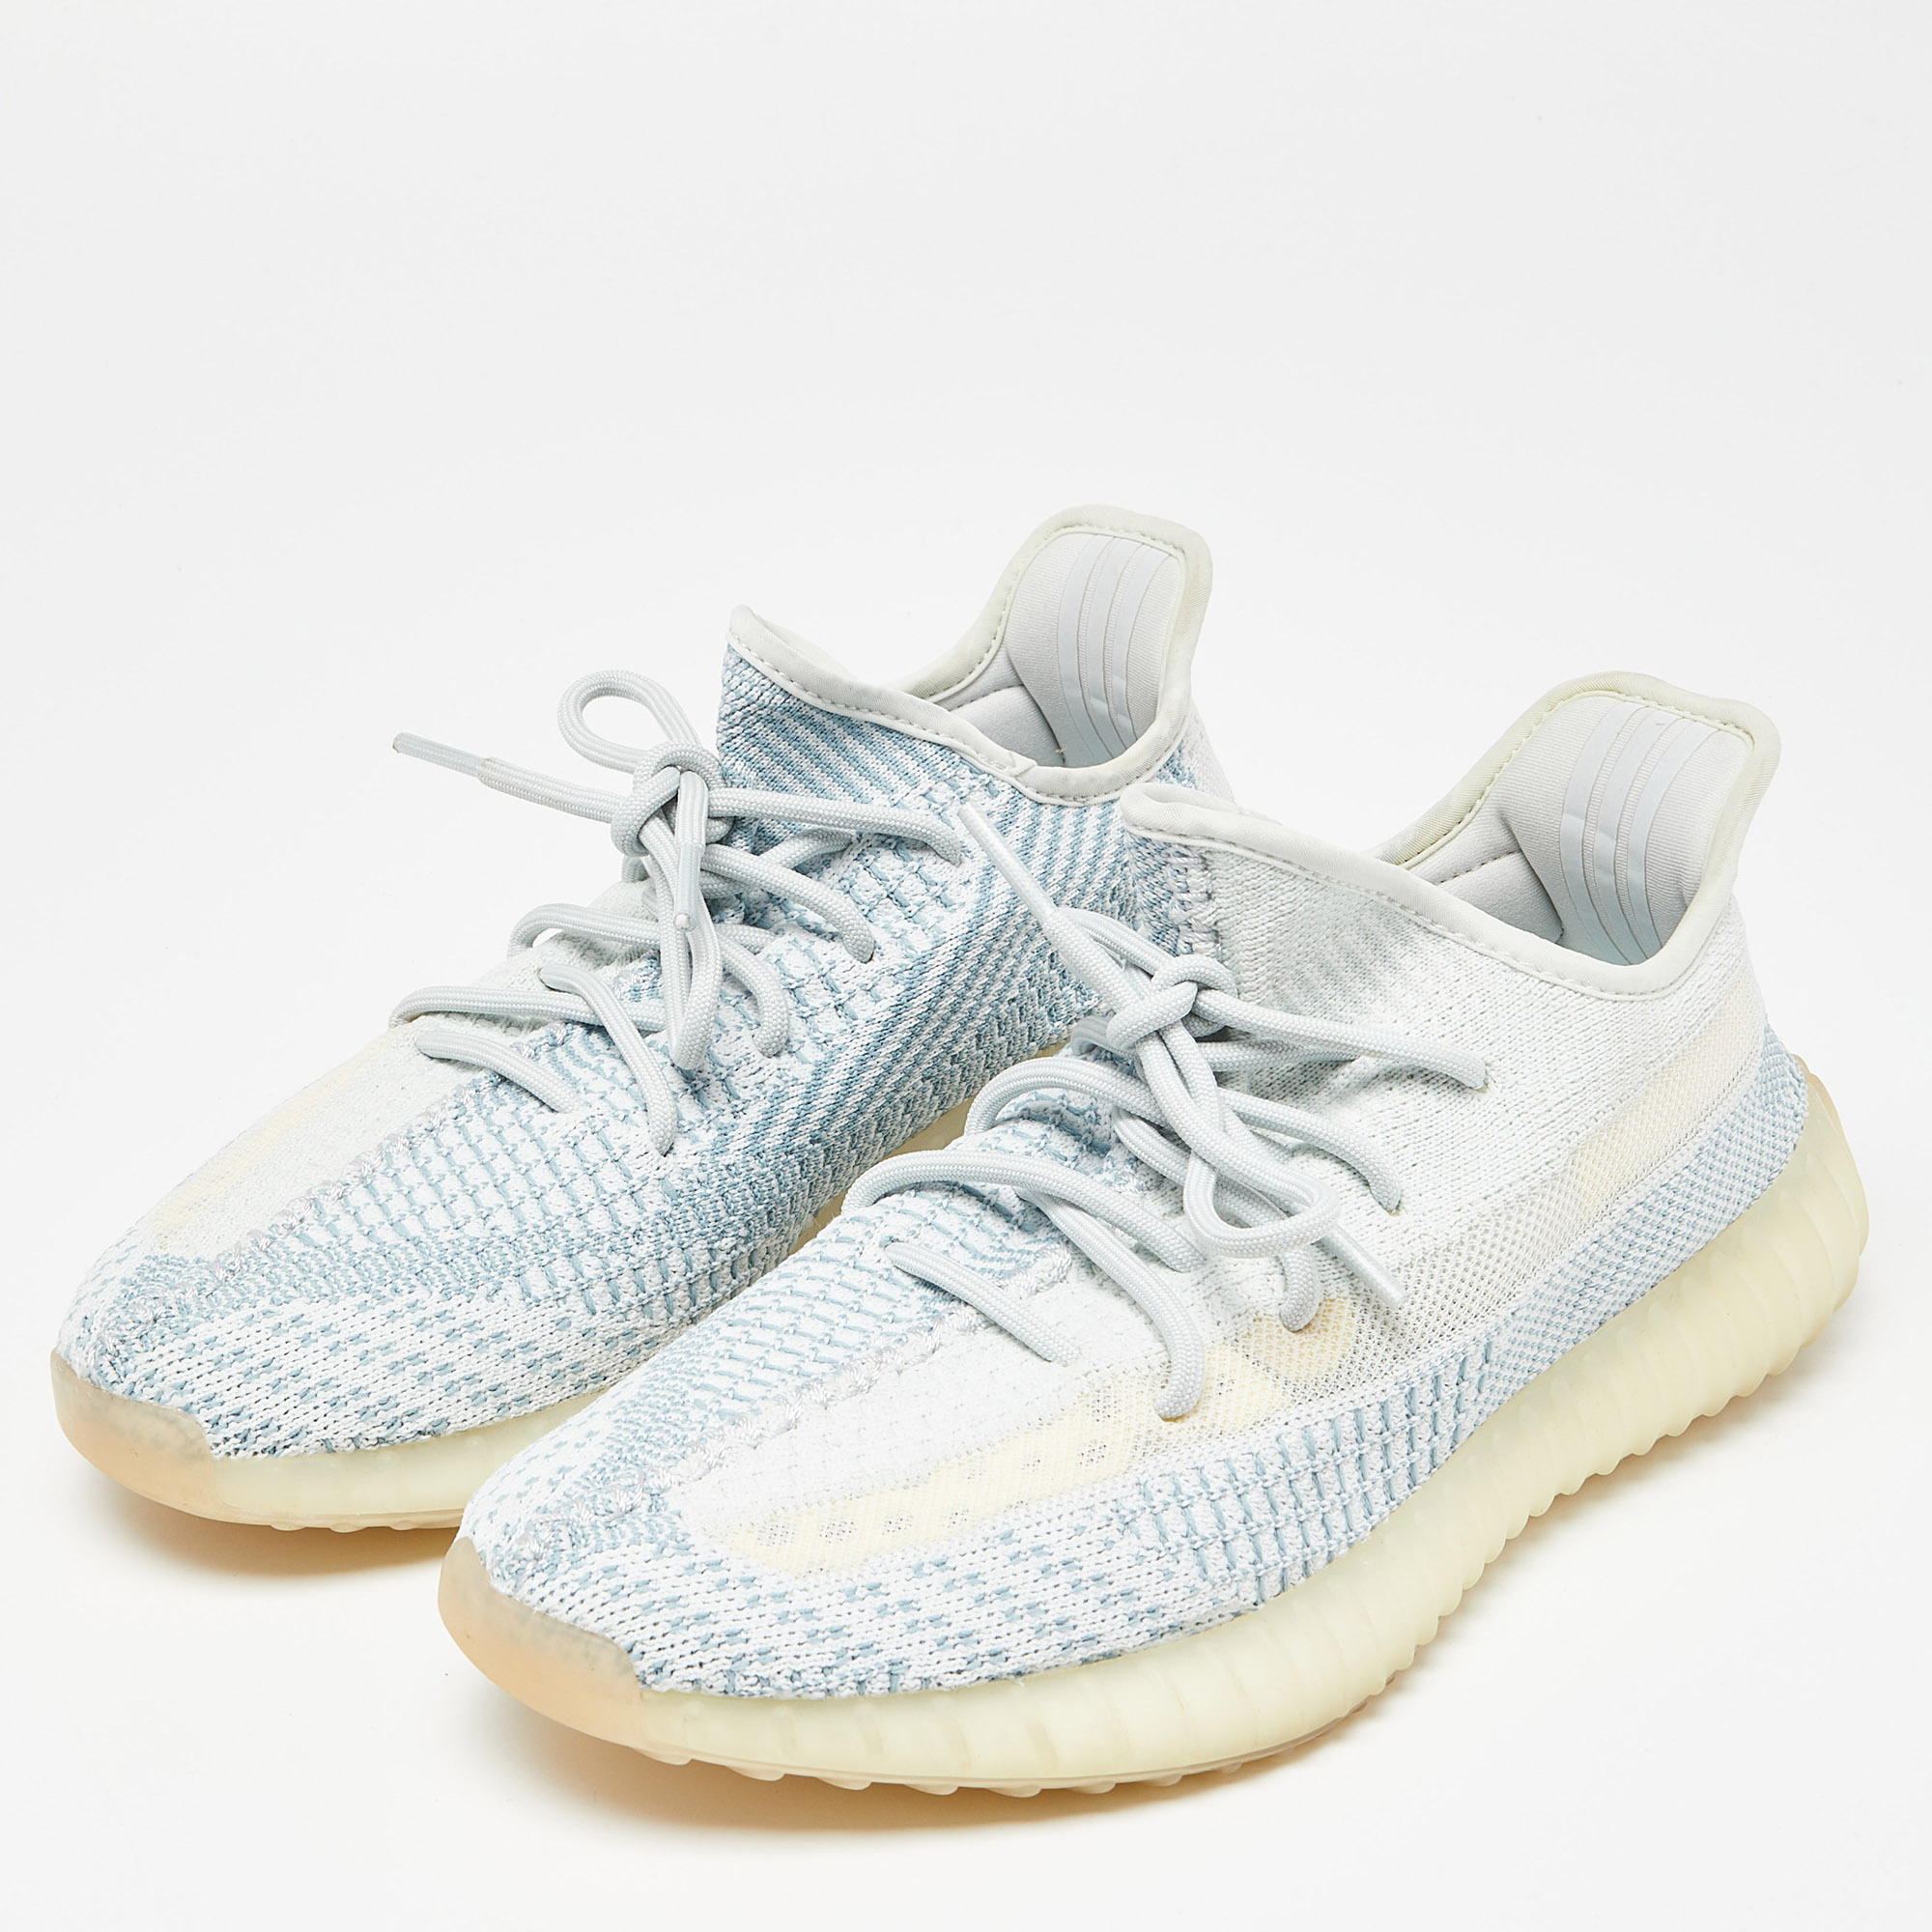 

Yeezy x Adidas Pale Green Knit Fabric Boost 350 V2 Cloud White Non Reflective Sneakers Size 42 2/3